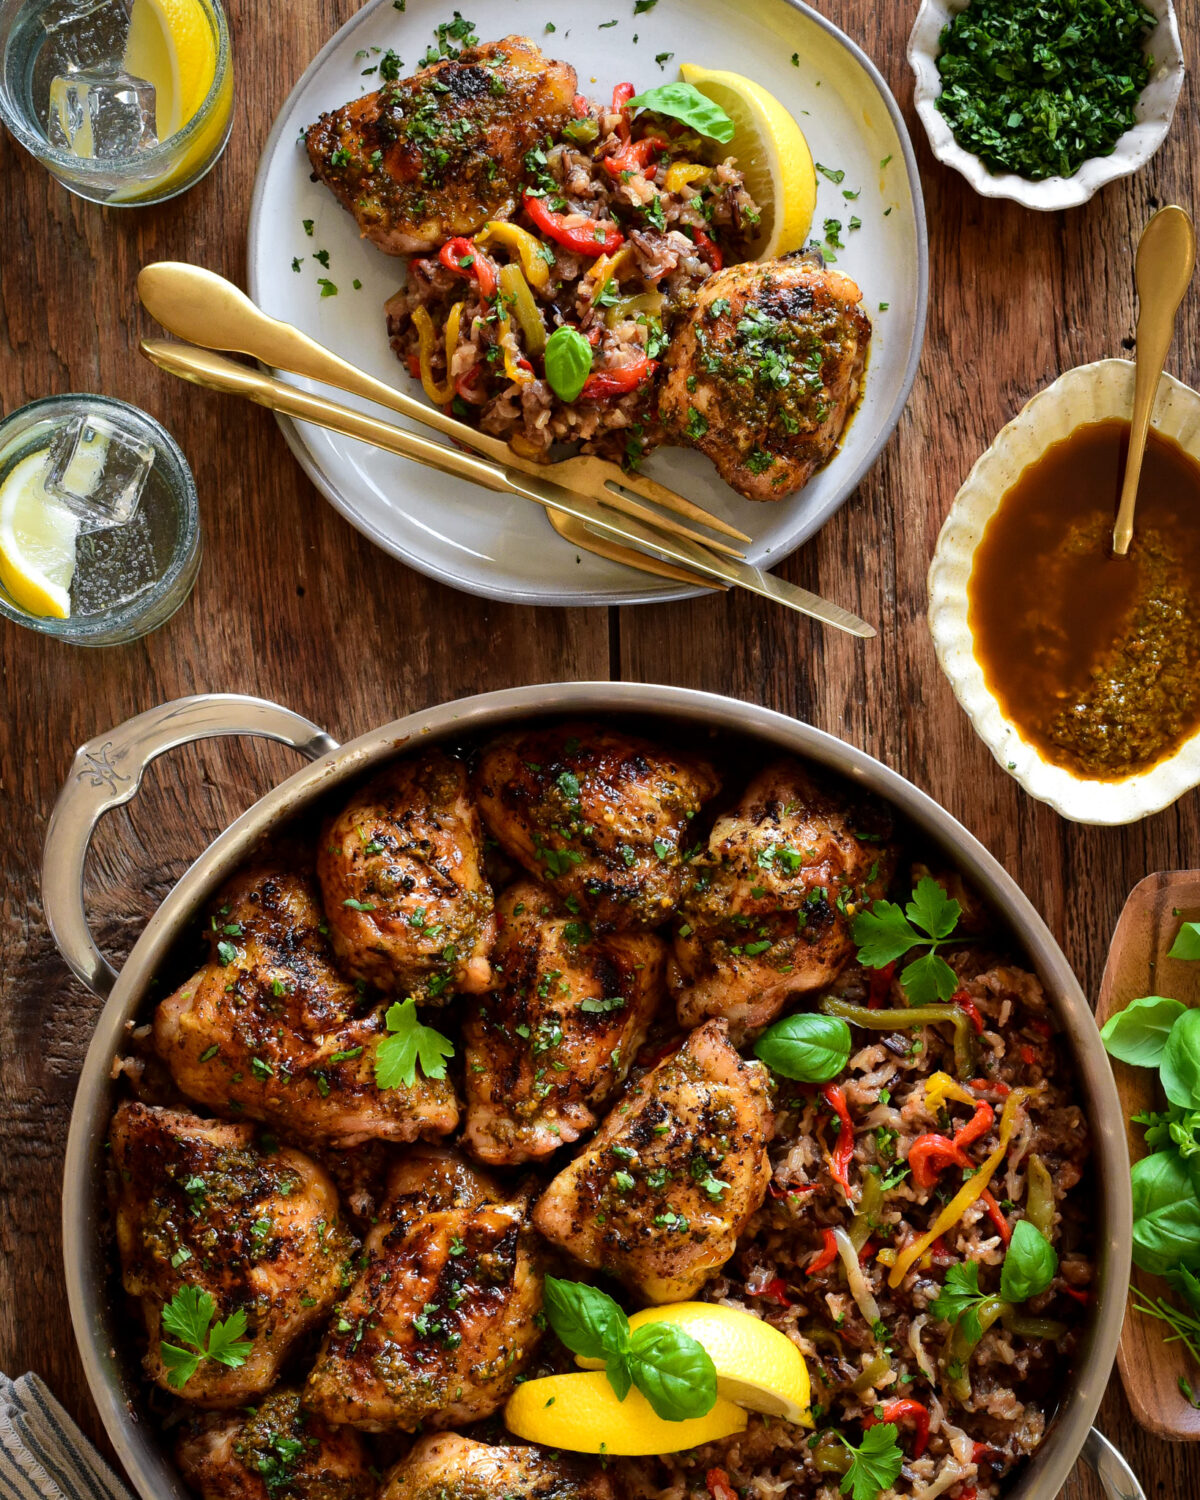 A large pot of Piri-Piri Chicken thighs with Spicy Rice along with a plated portion.